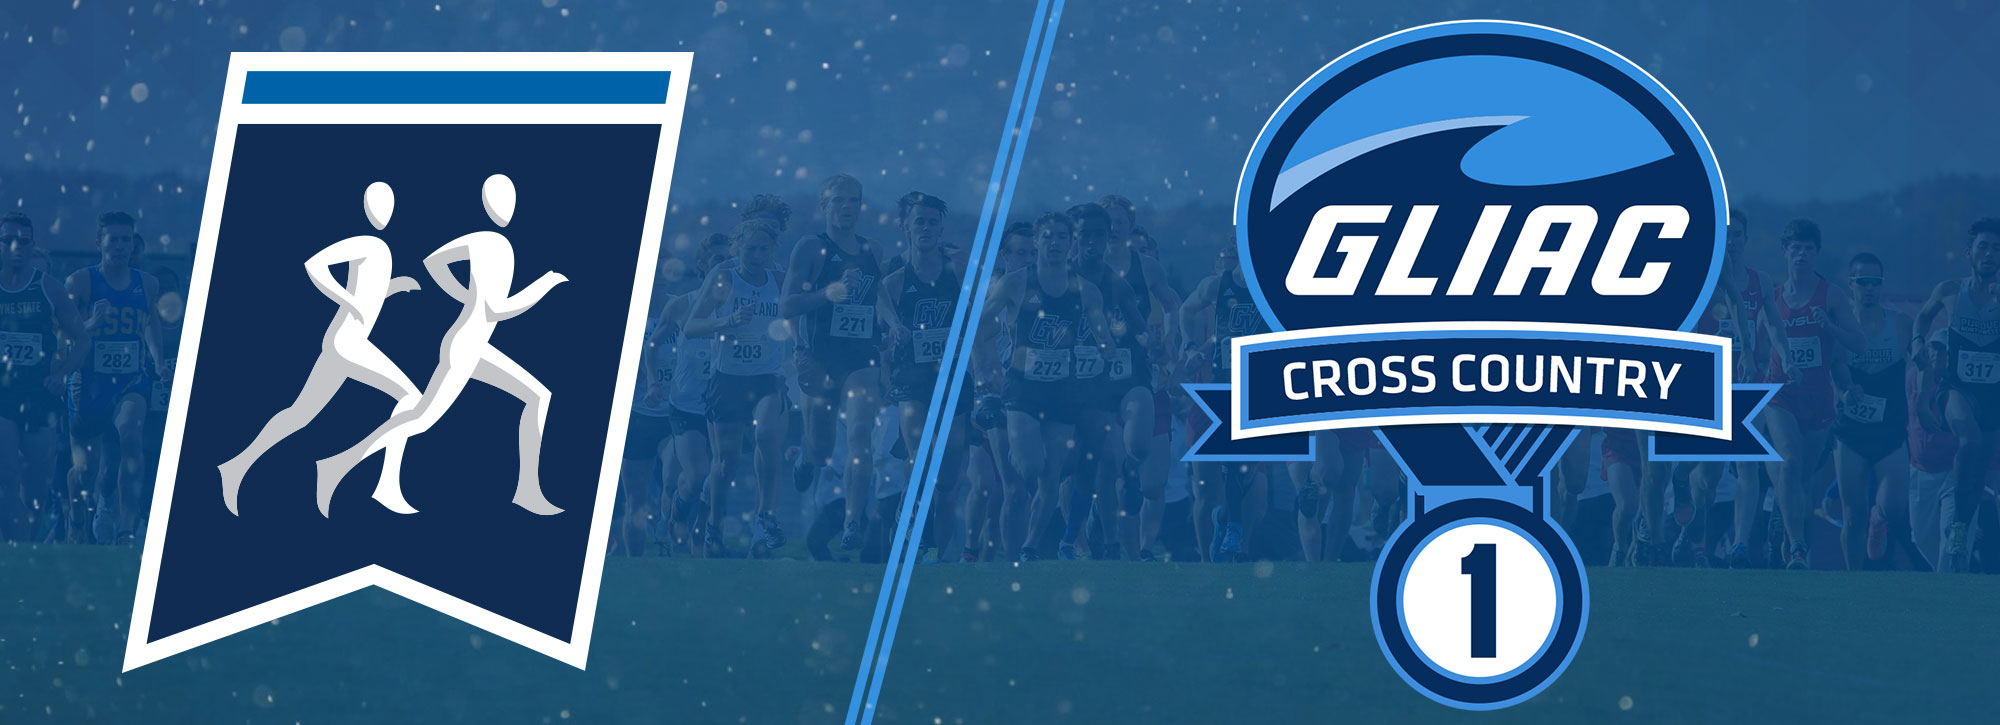 NCAA Cross Country Championships Qualifiers Announced; Four Teams, Six Individuals Headed to Pittsburgh